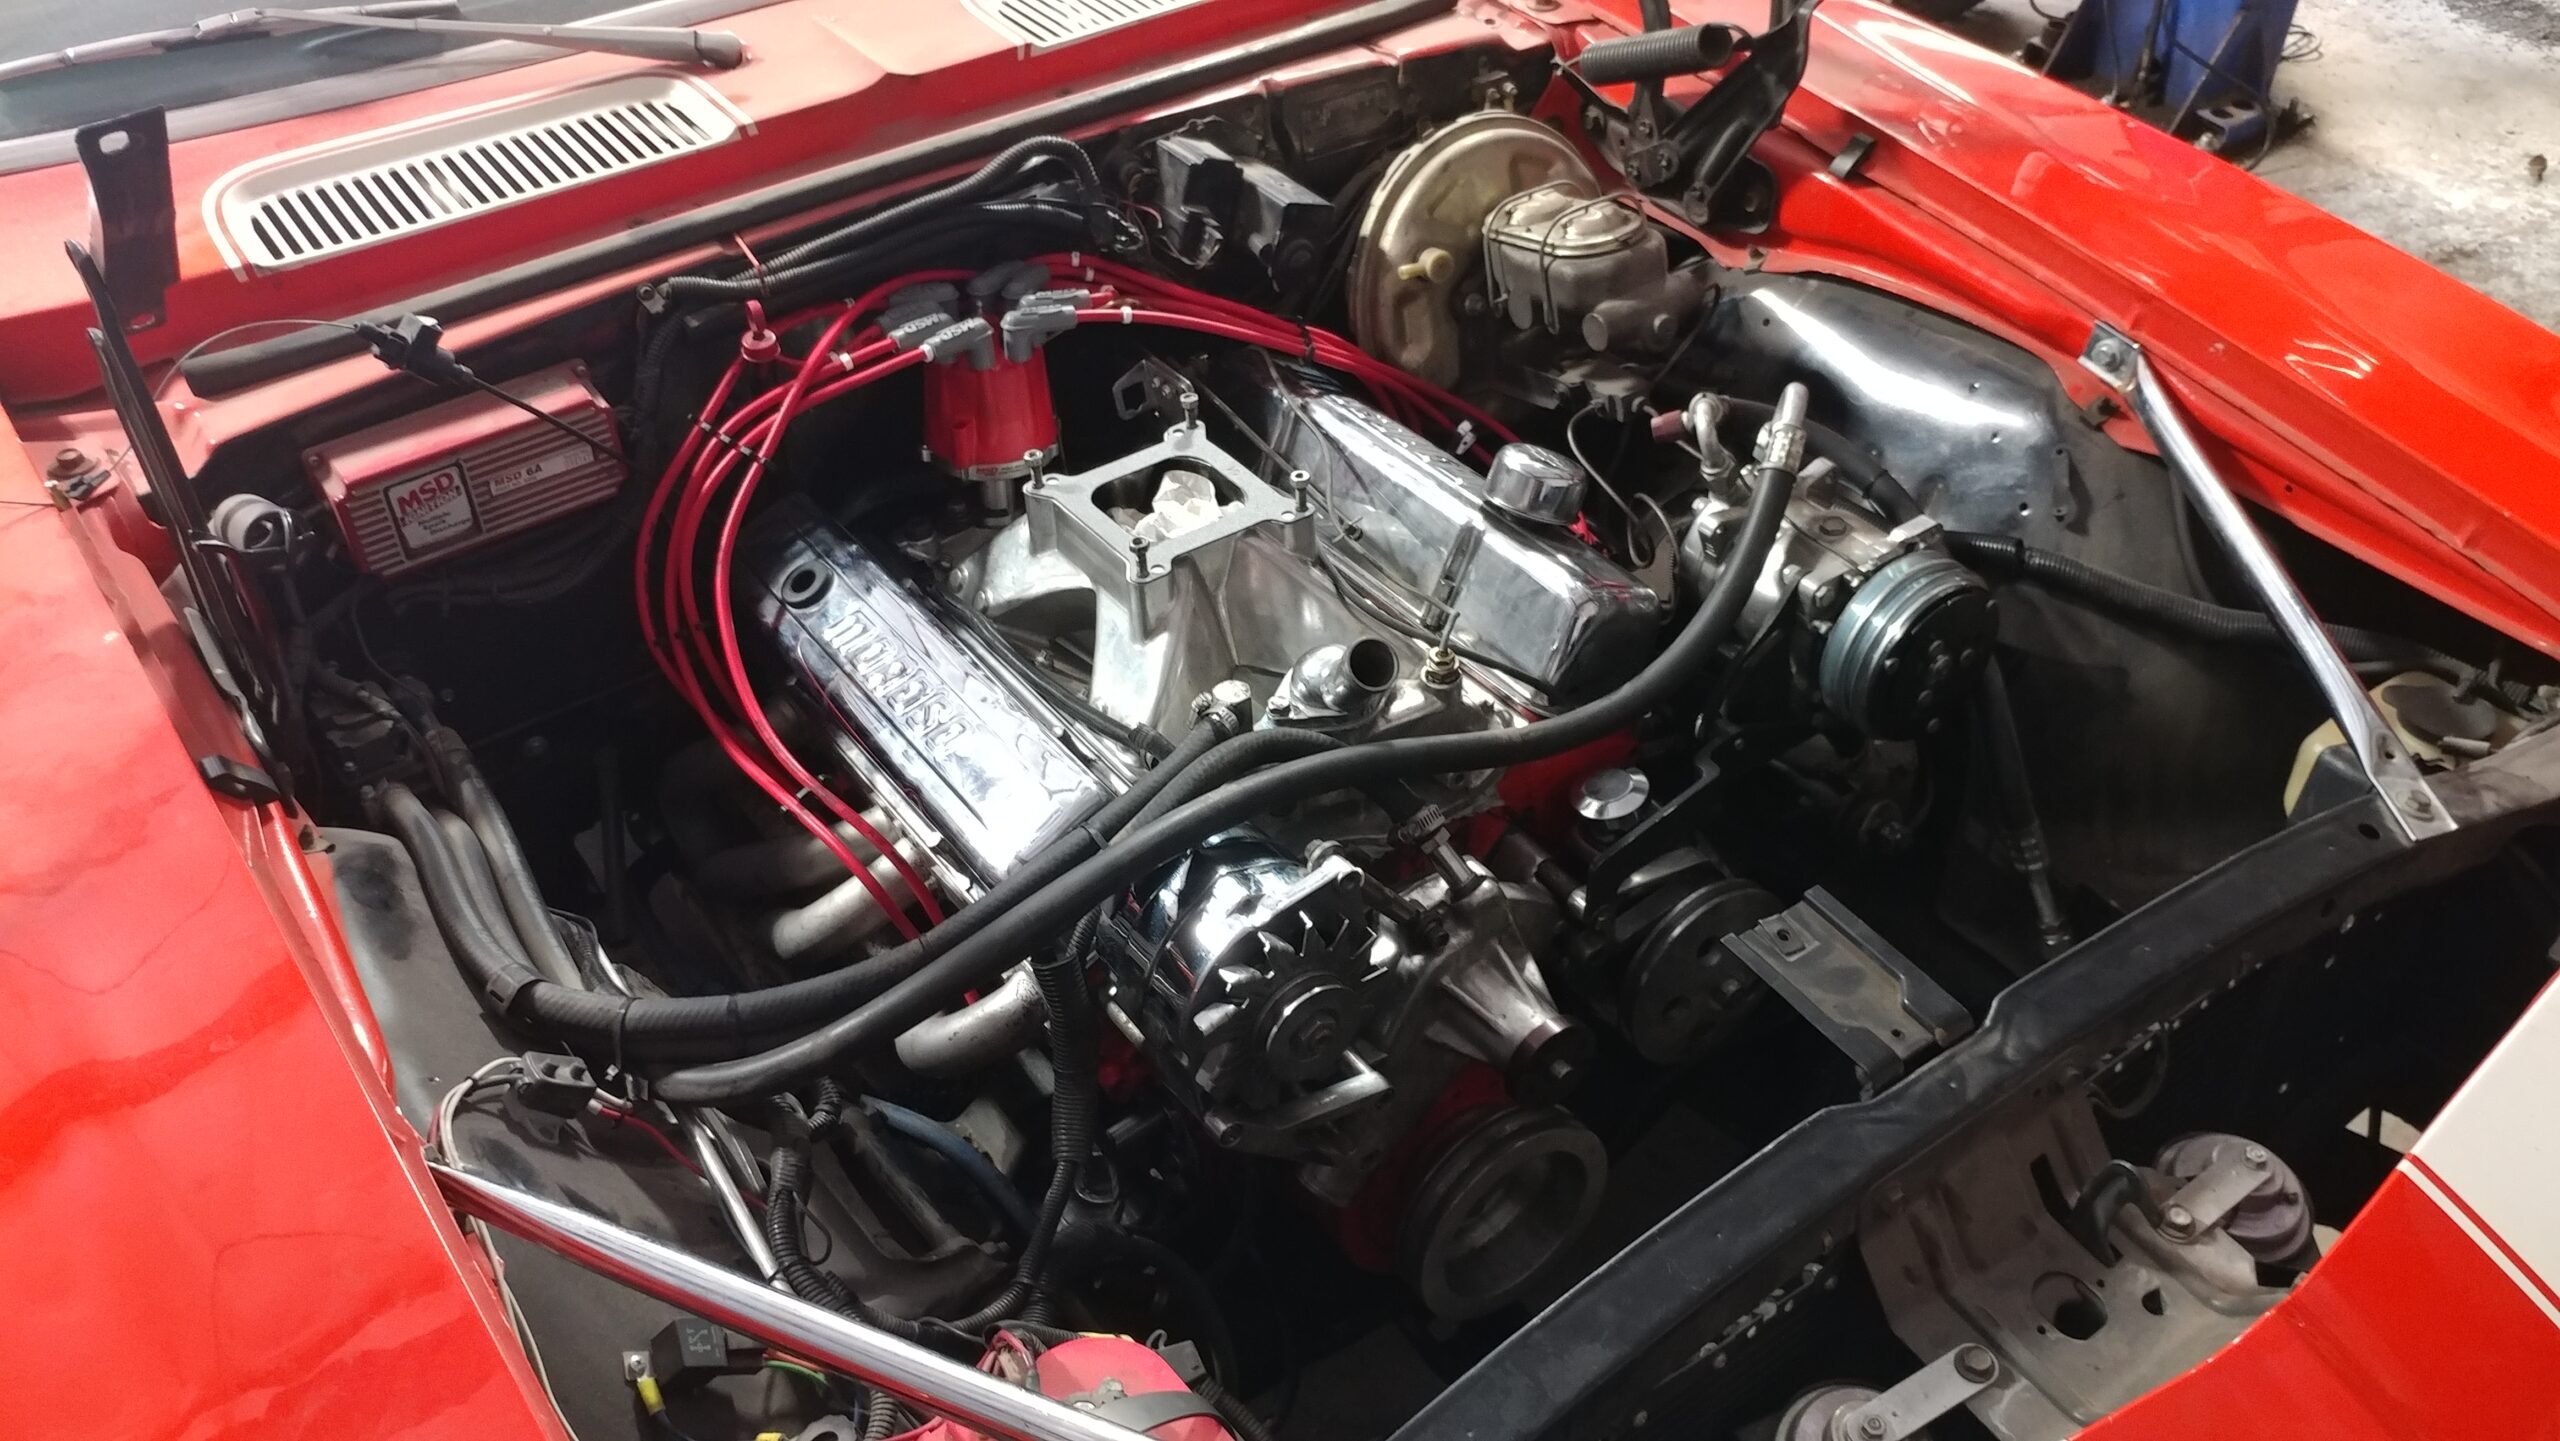 An open car hood reveals a V8 engine with various components and red ignition wires in a red vehicle.